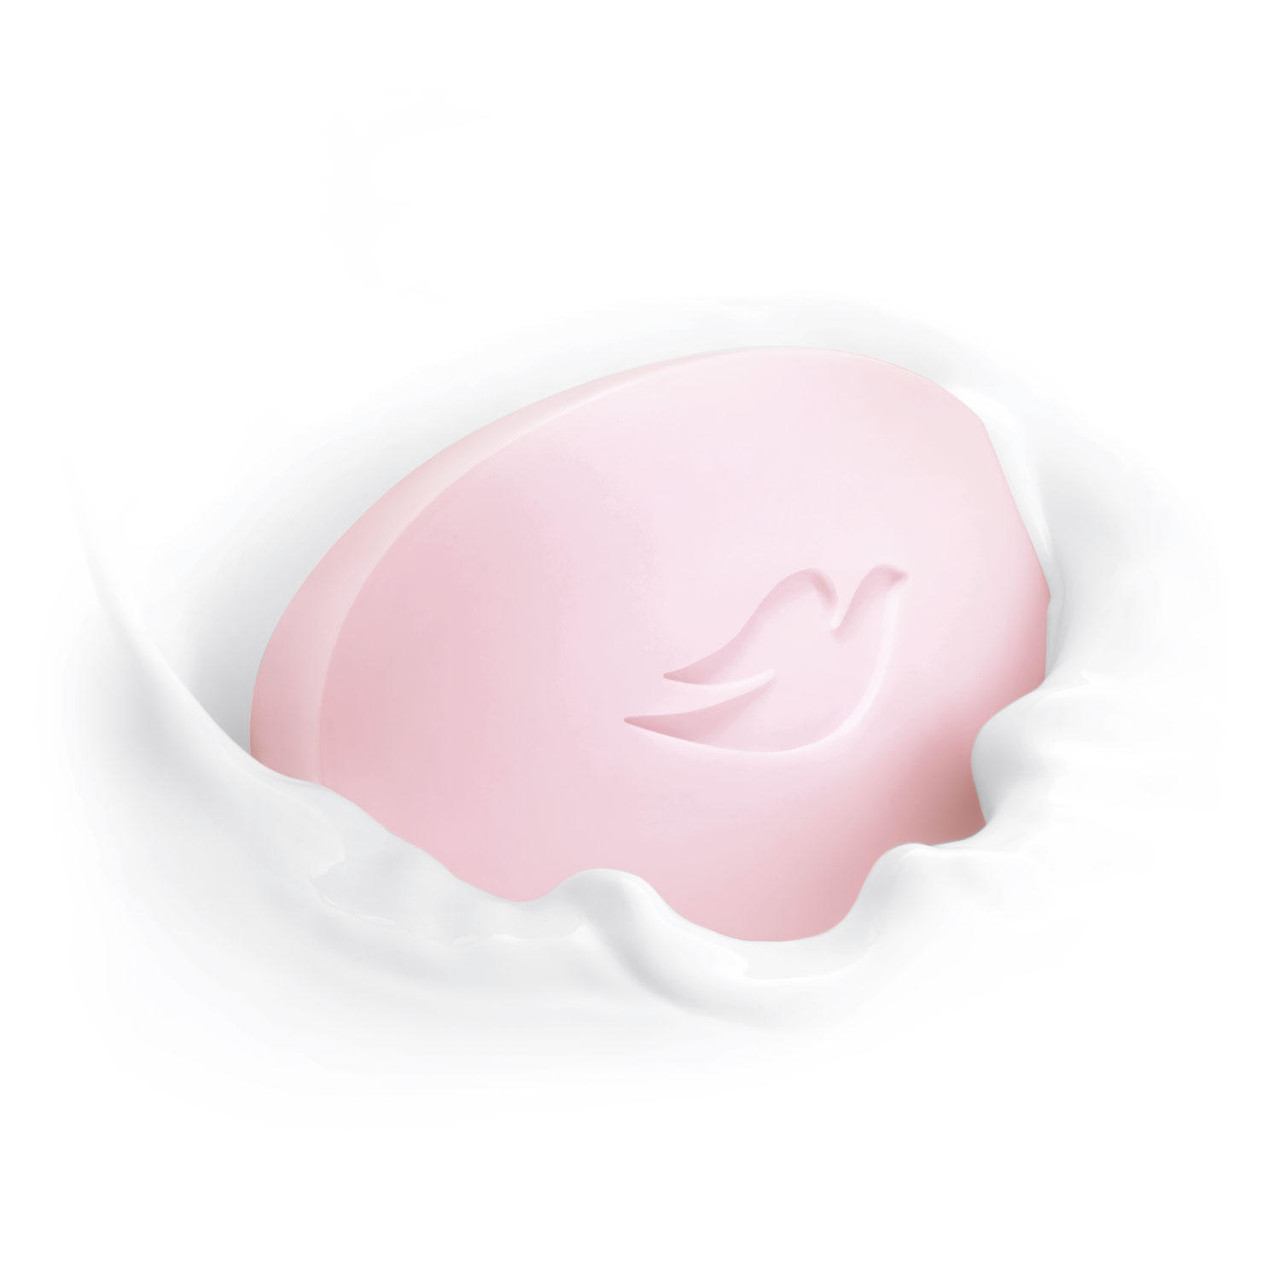 Dove Beauty Bar Soap, Pink (3.75 oz., 16 ct.) - [From 72.00 - Choose pk Qty ] - *Ships from Miami